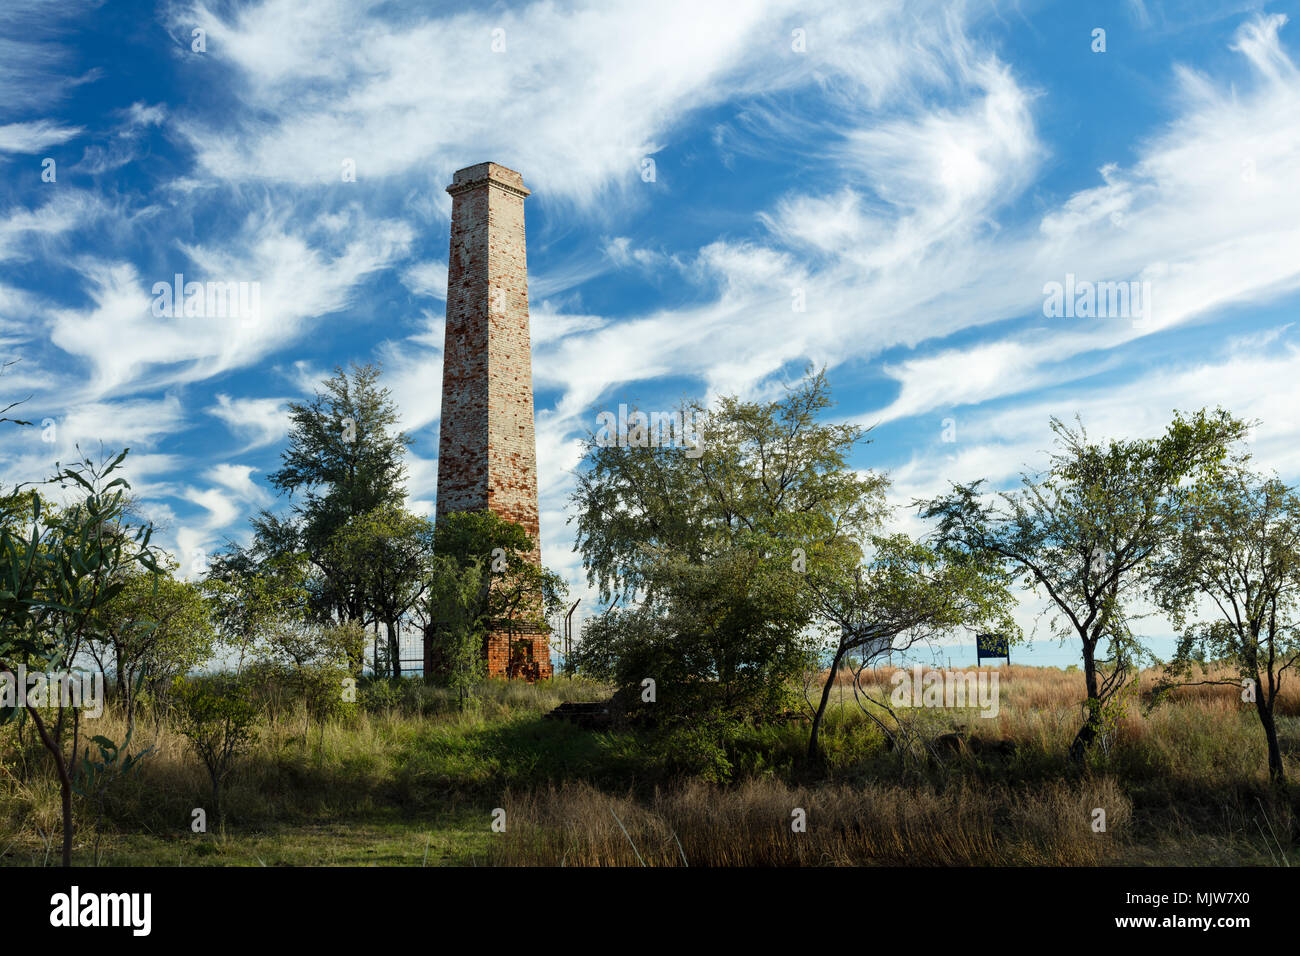 Georgetown, Queensland, Australia. Dramatic cirrus clouds over the old chimney at the Cumberland Gold mine near Georgetown on the Savannah Way in outb Stock Photo